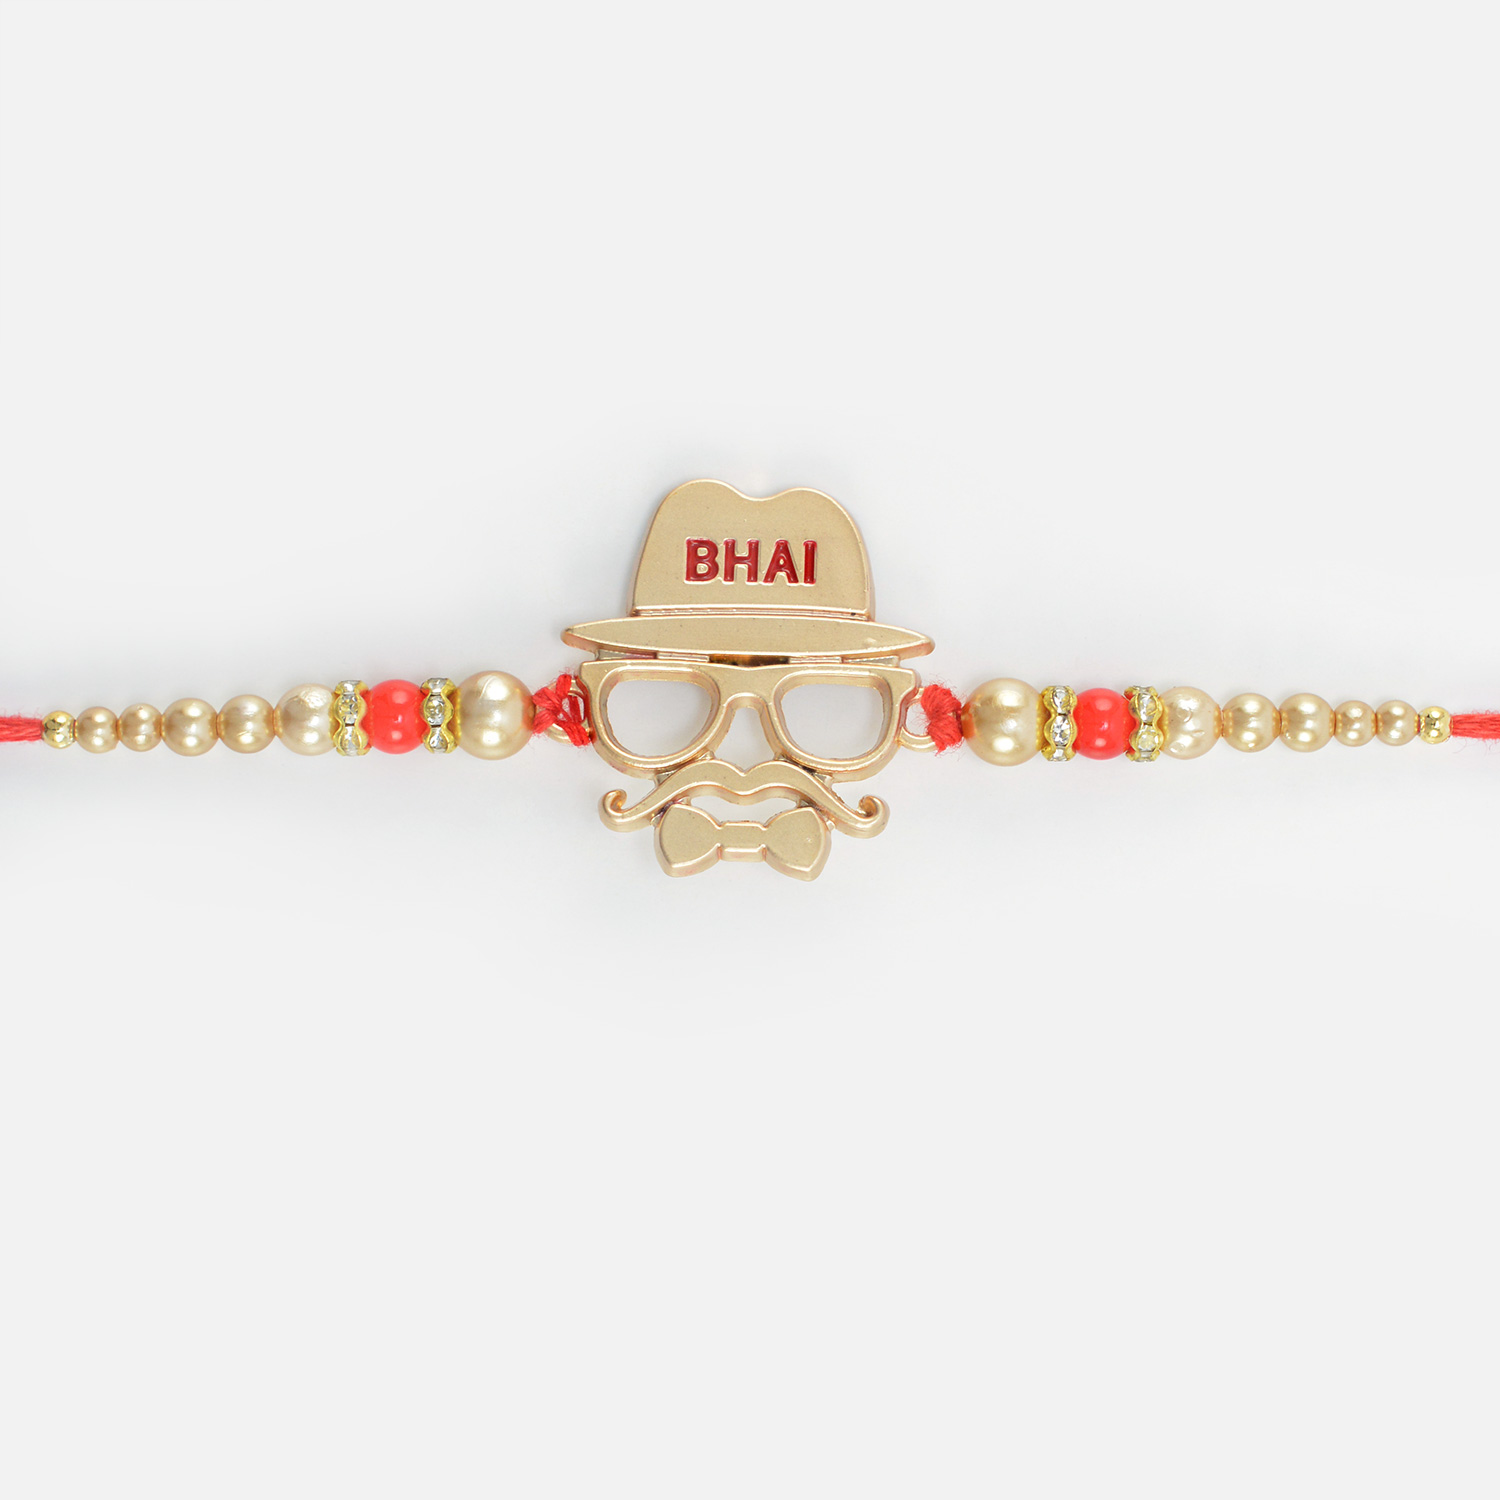 Fancy Mustache and Goggles Design Detective Bhai Look Beads Design er Rakhi for Brother